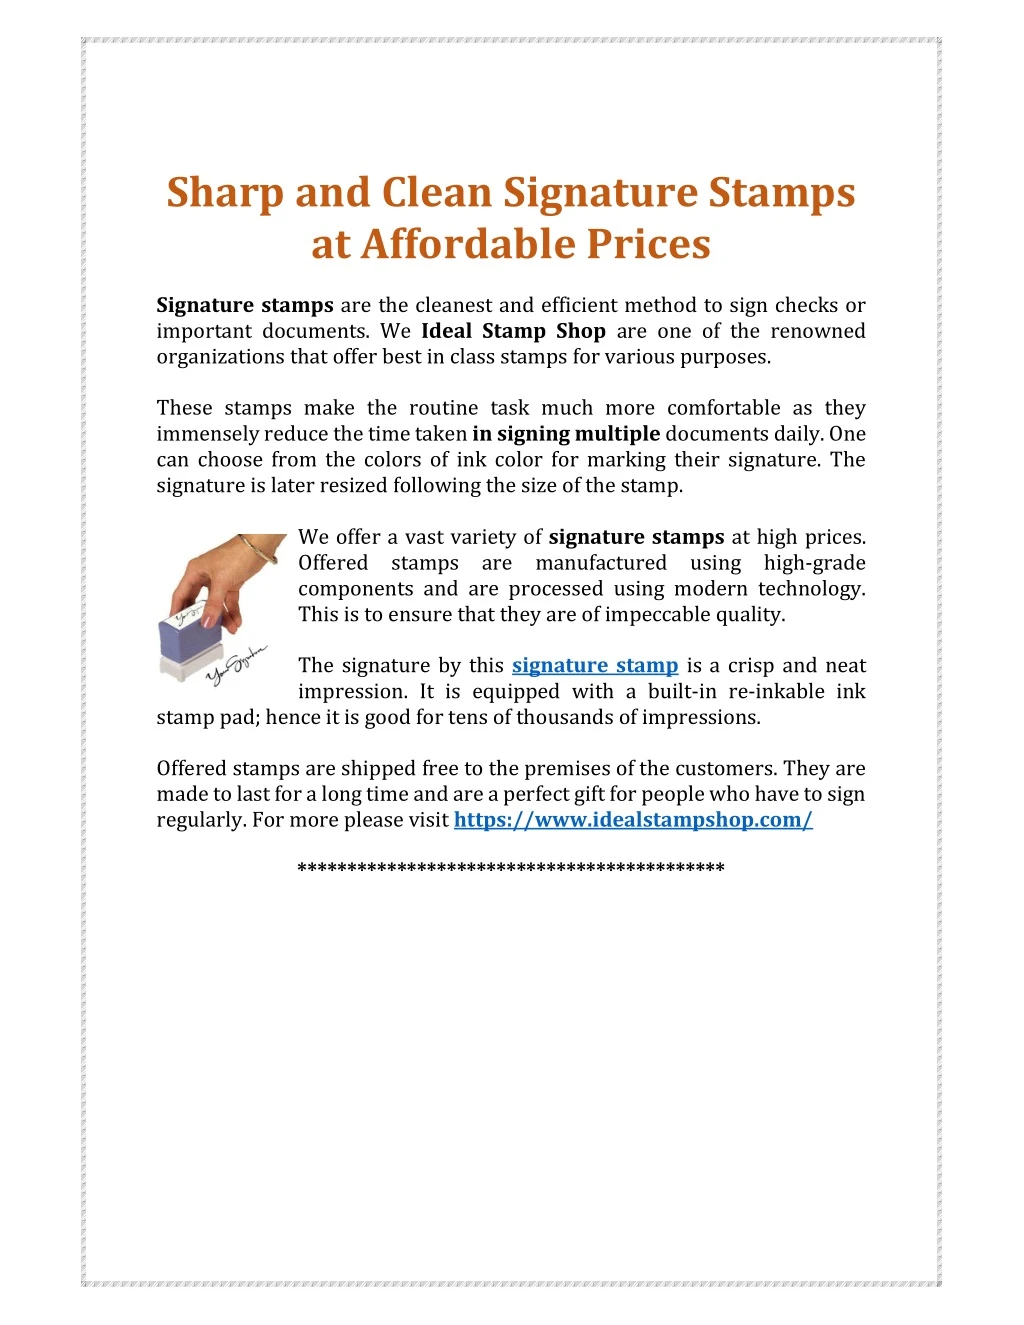 sharp and clean signature stamps at affordable